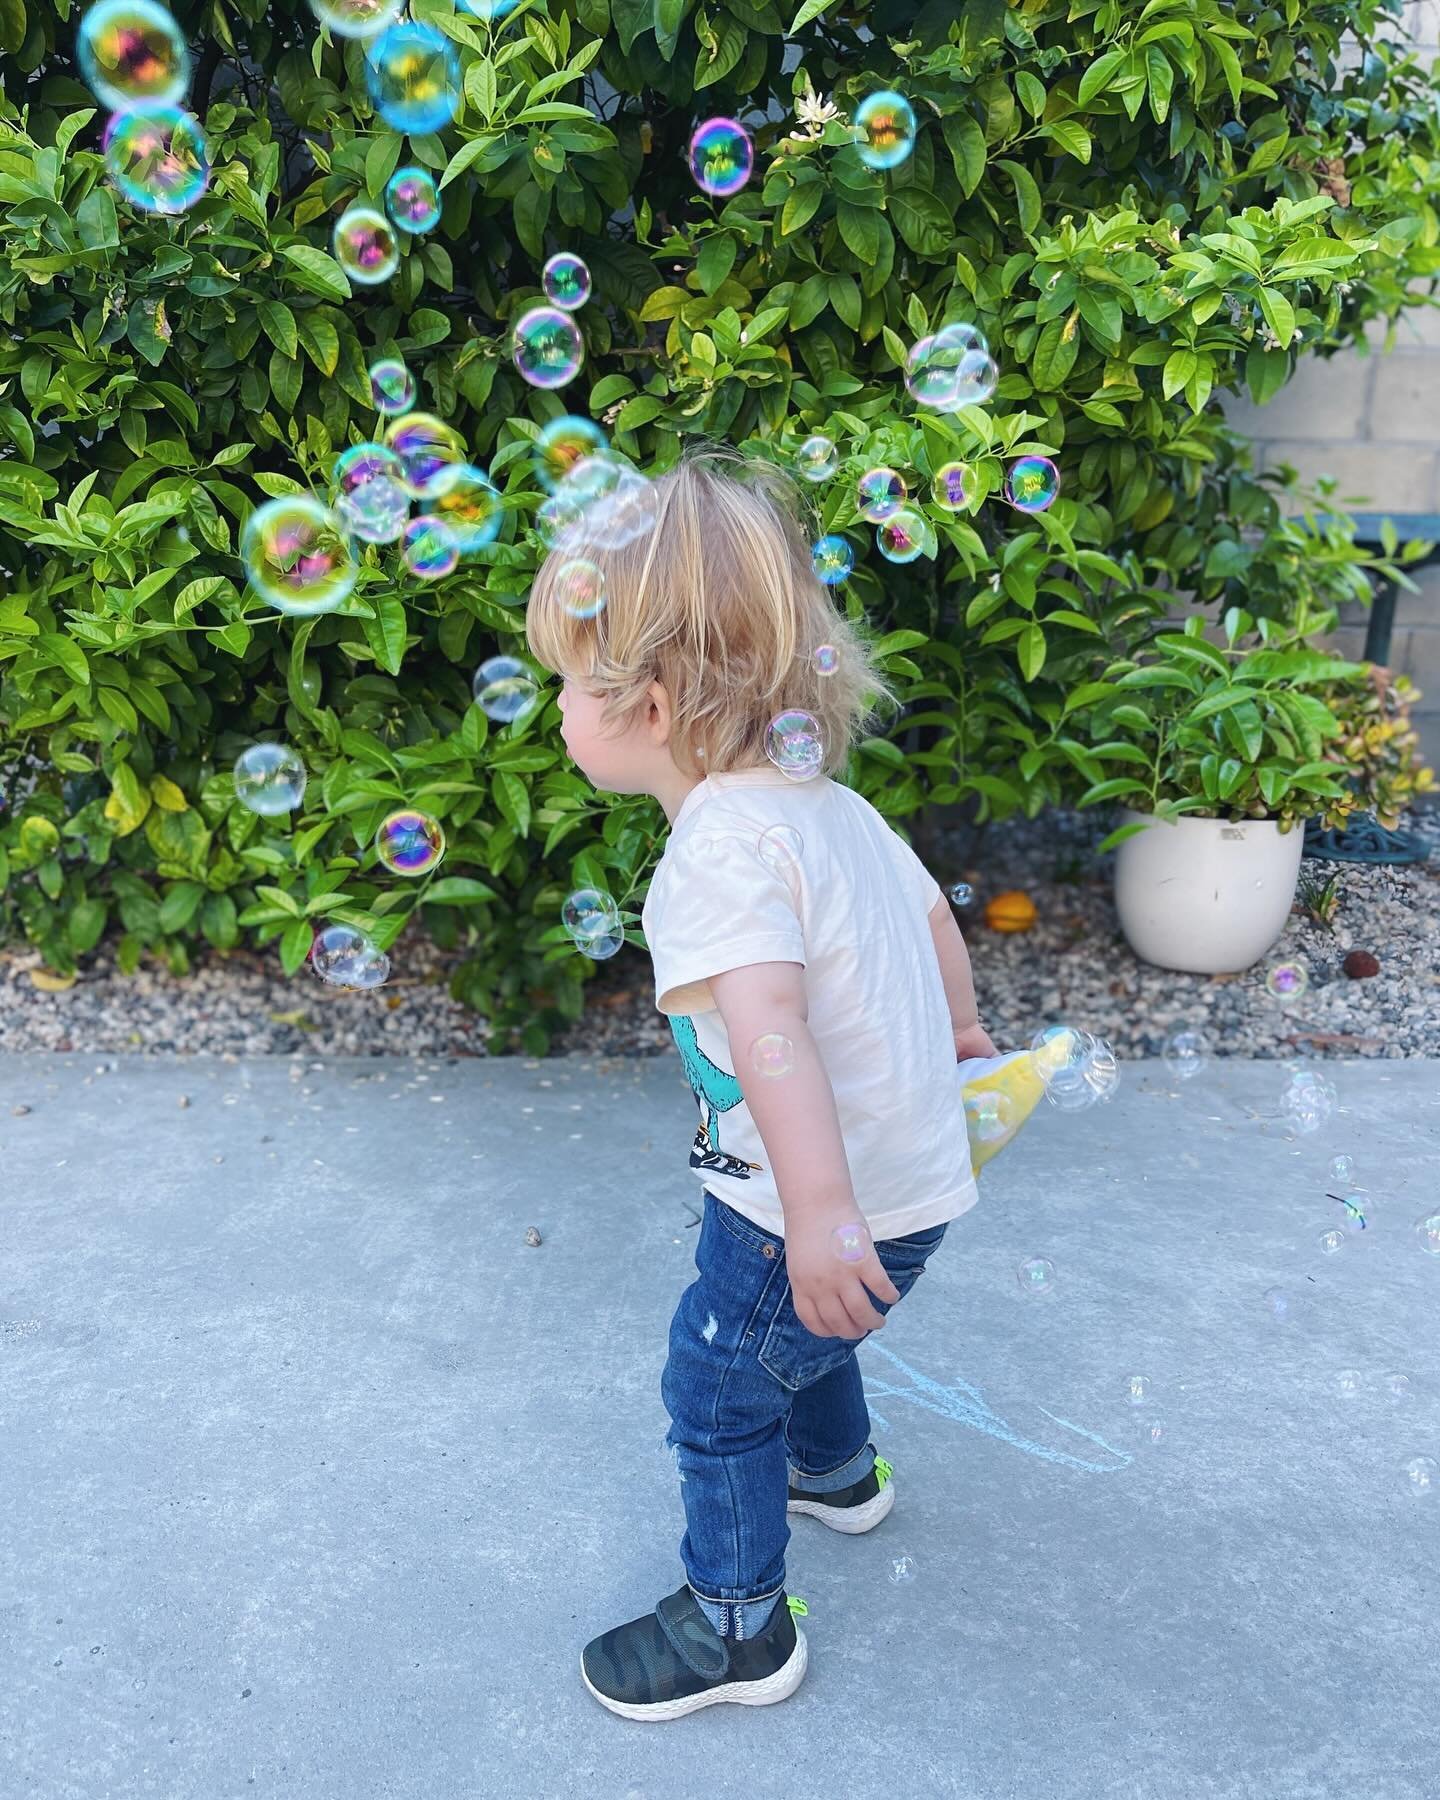 parenting tip: get a bubble gun at the dollar store 🫧🤭 #toddlermom #toddlers #toddleractivities #LaurenIRL